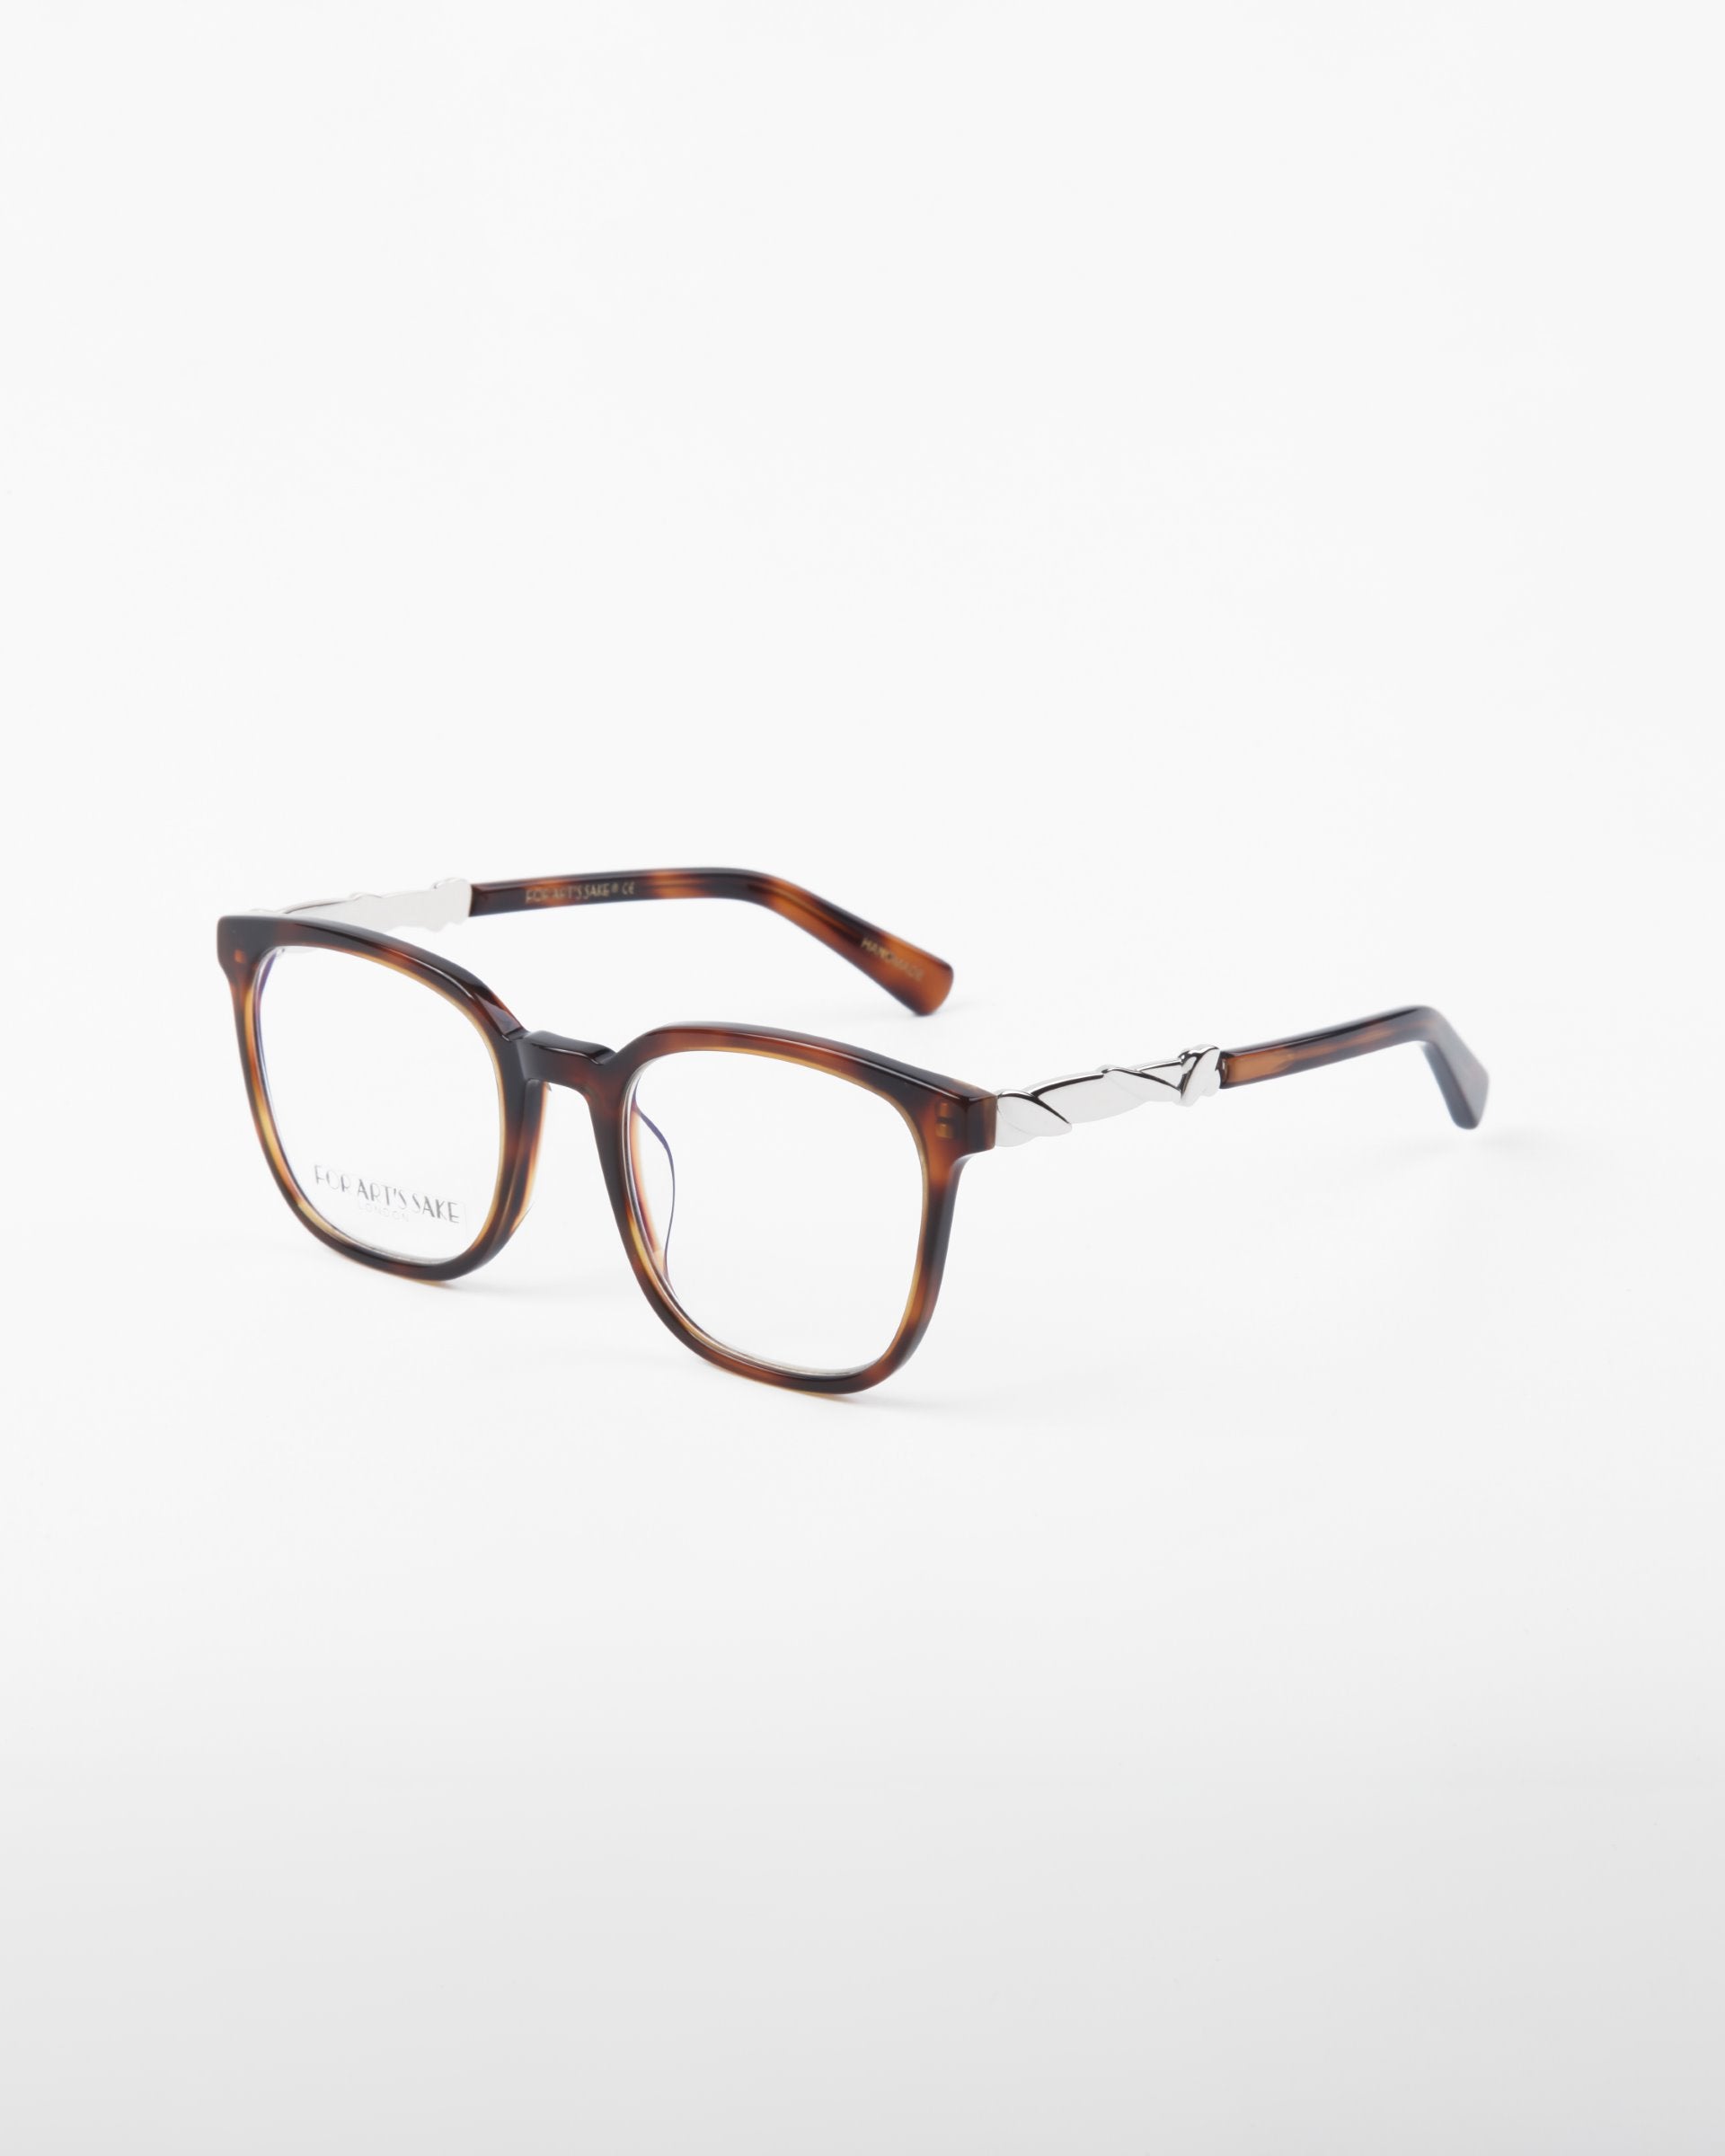 A pair of For Art&#39;s Sake® Molten rectangular eyeglasses with tortoiseshell frames made from plant-based acetate and silver metal accents on the temples, set against a plain white background. The lenses are clear, suitable for prescription eyewear or fashion wear, and potentially feature a blue light filter.